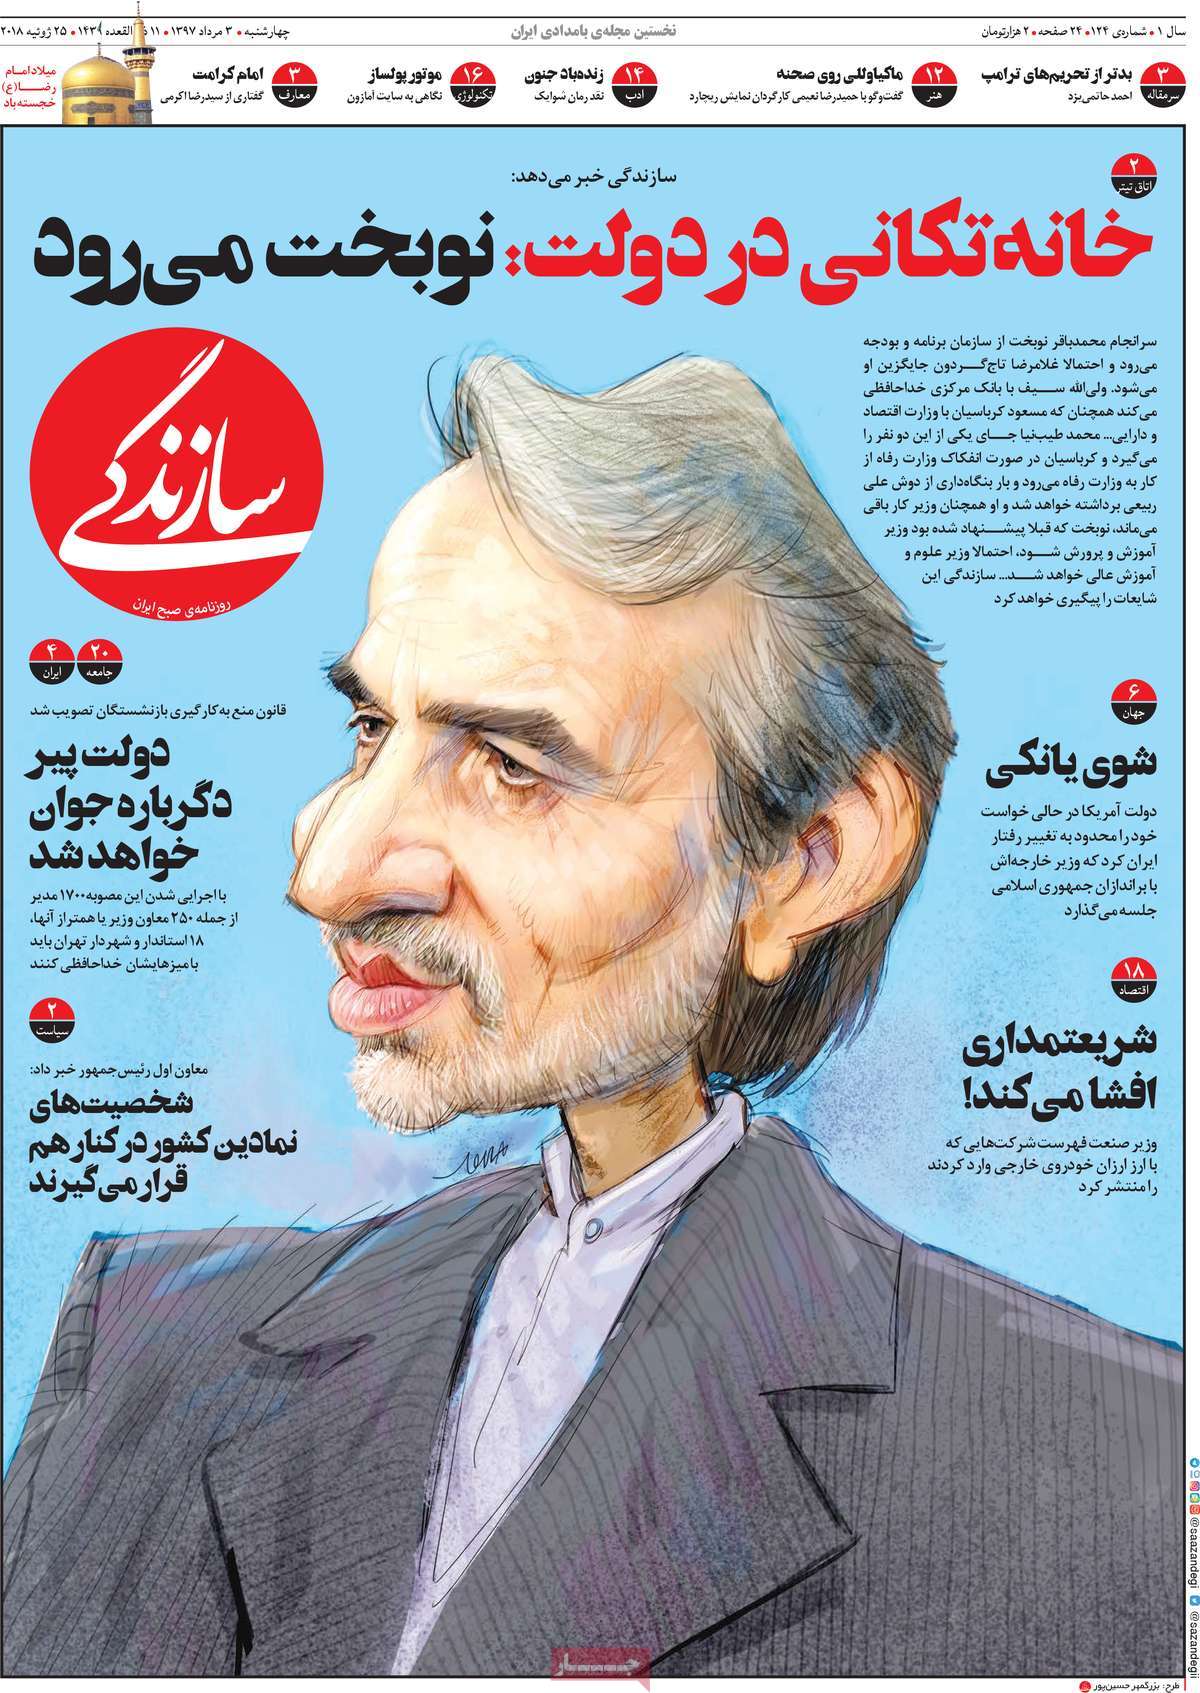 A Look at Iranian Newspaper Front Pages on July 25